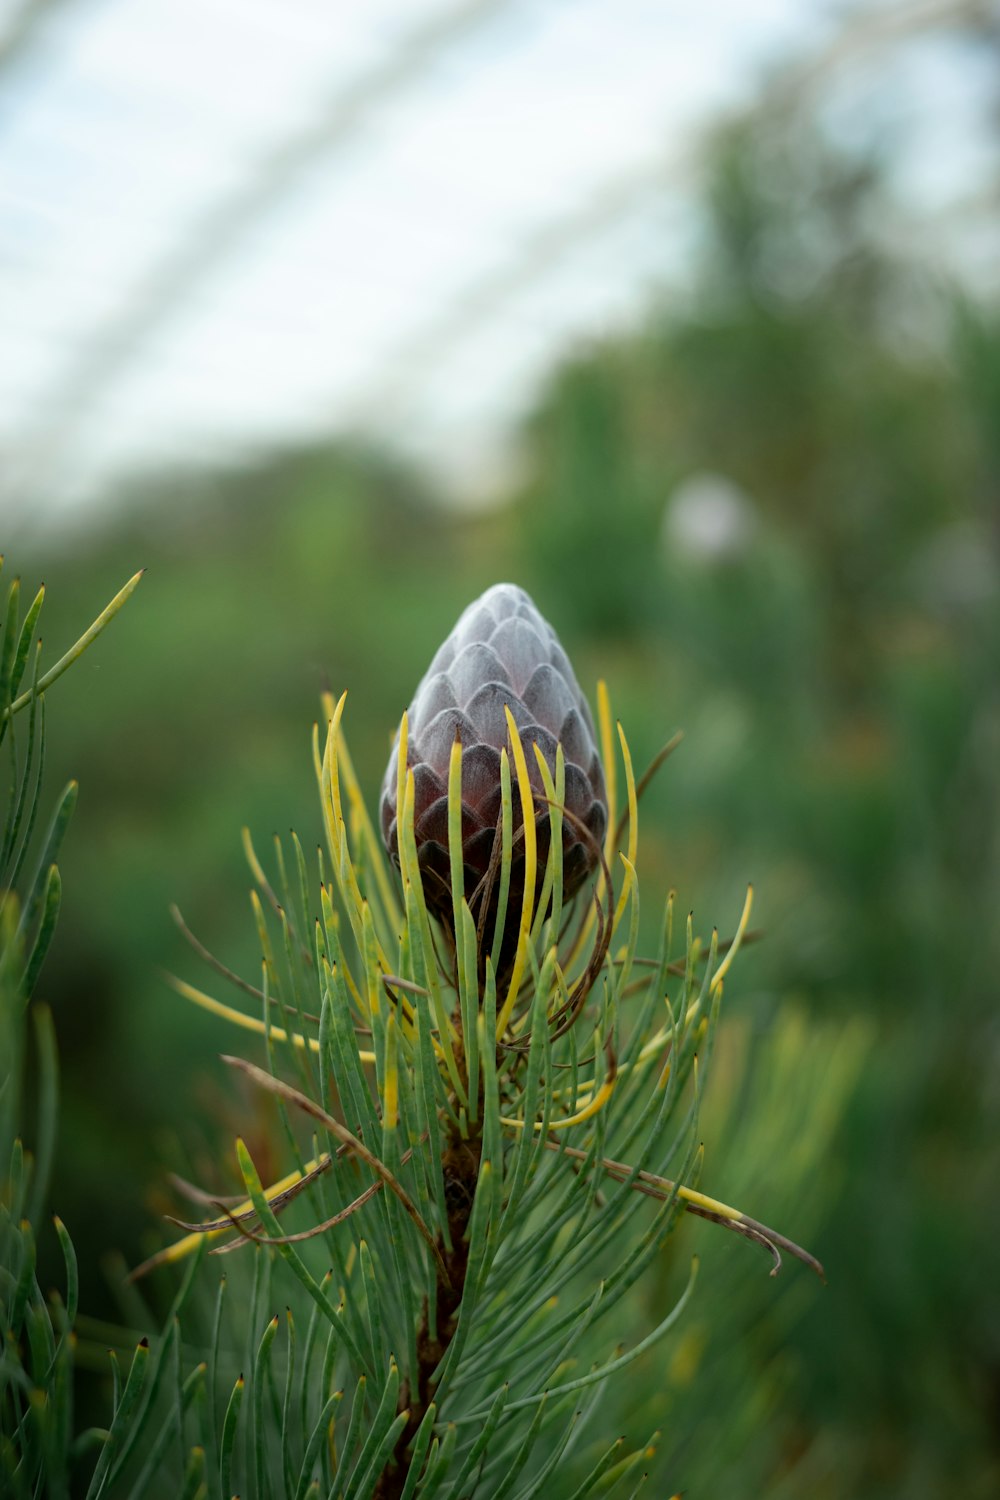 a close up of a pine tree with a bug on it